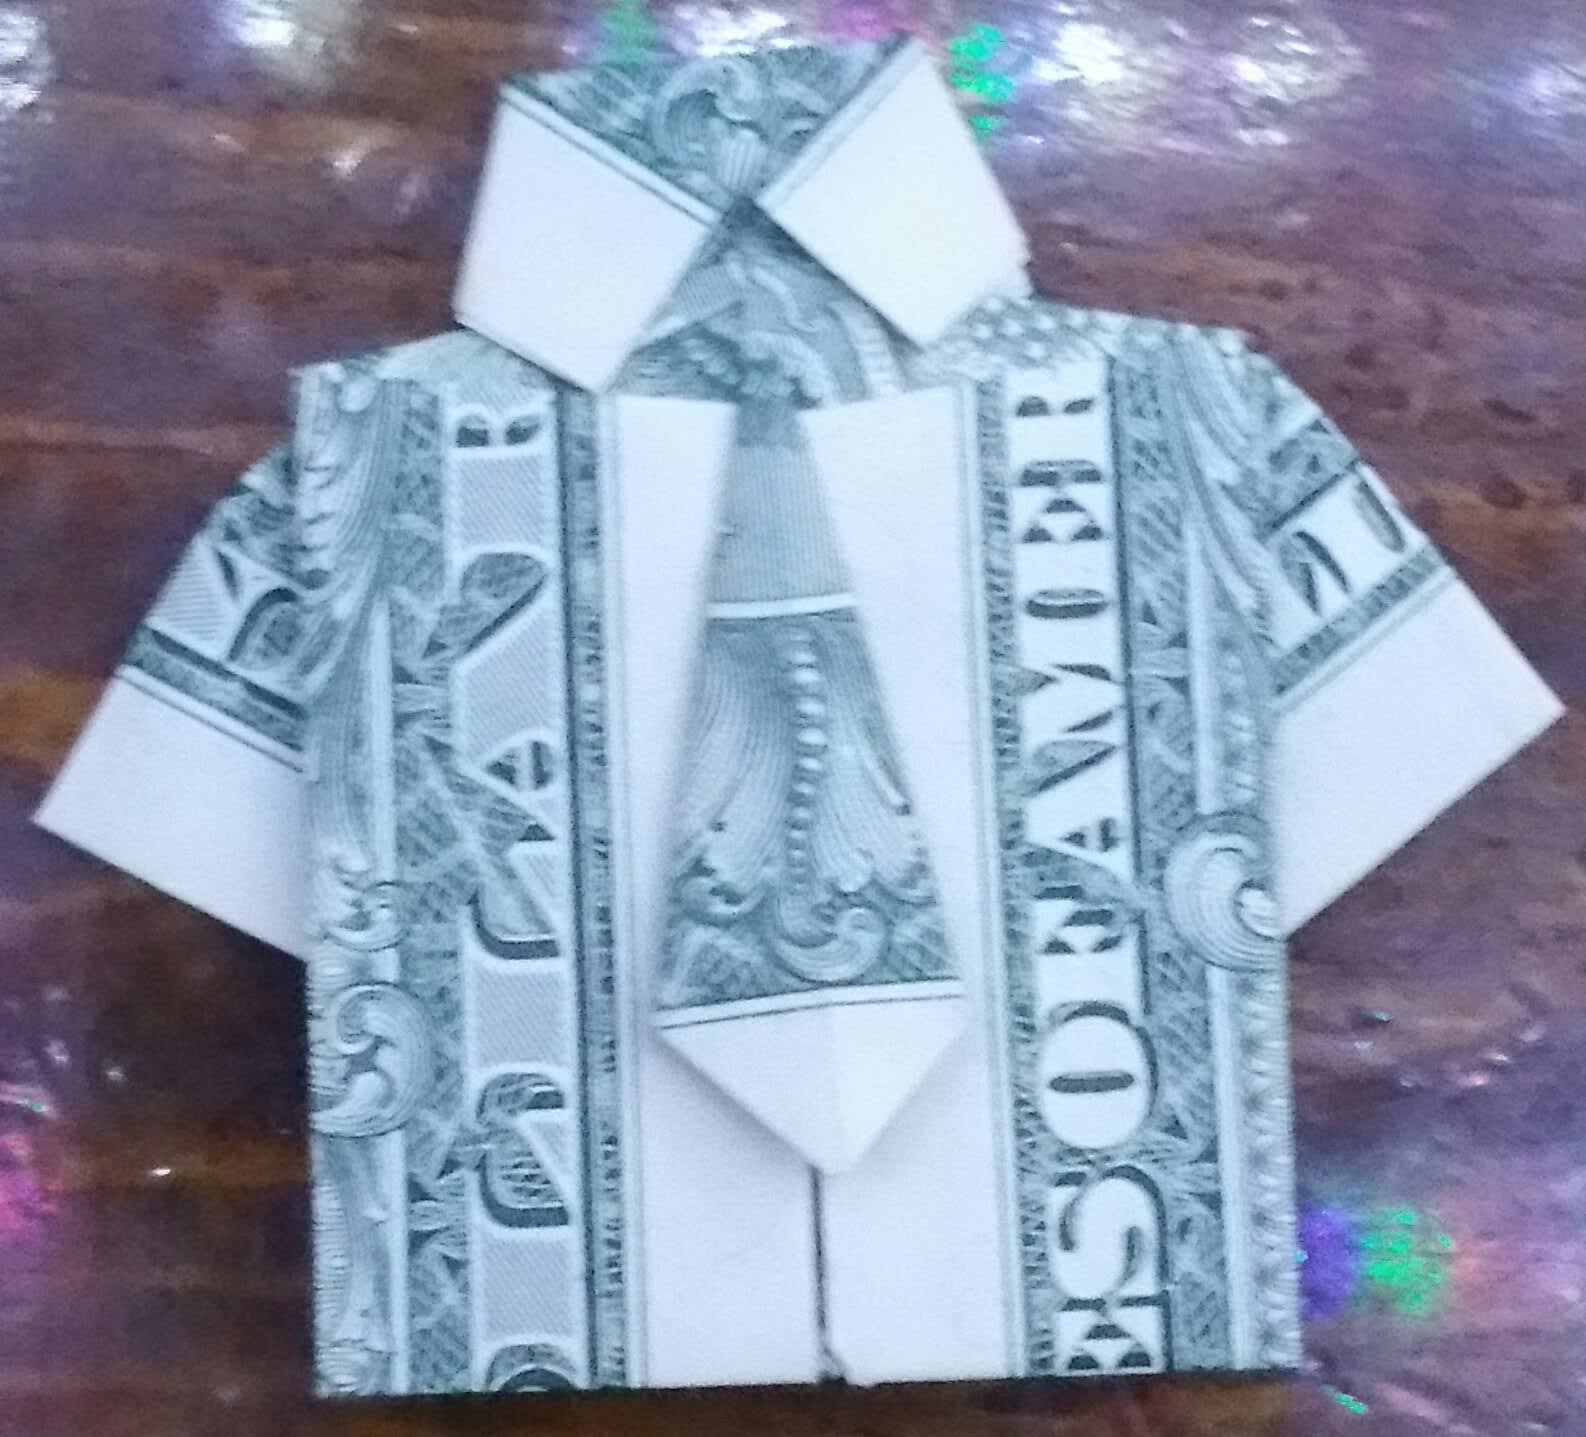 Dollar Bill Origami Shirt With Tie Make You A Origami Shirt With Tie From A One Dollar Bill